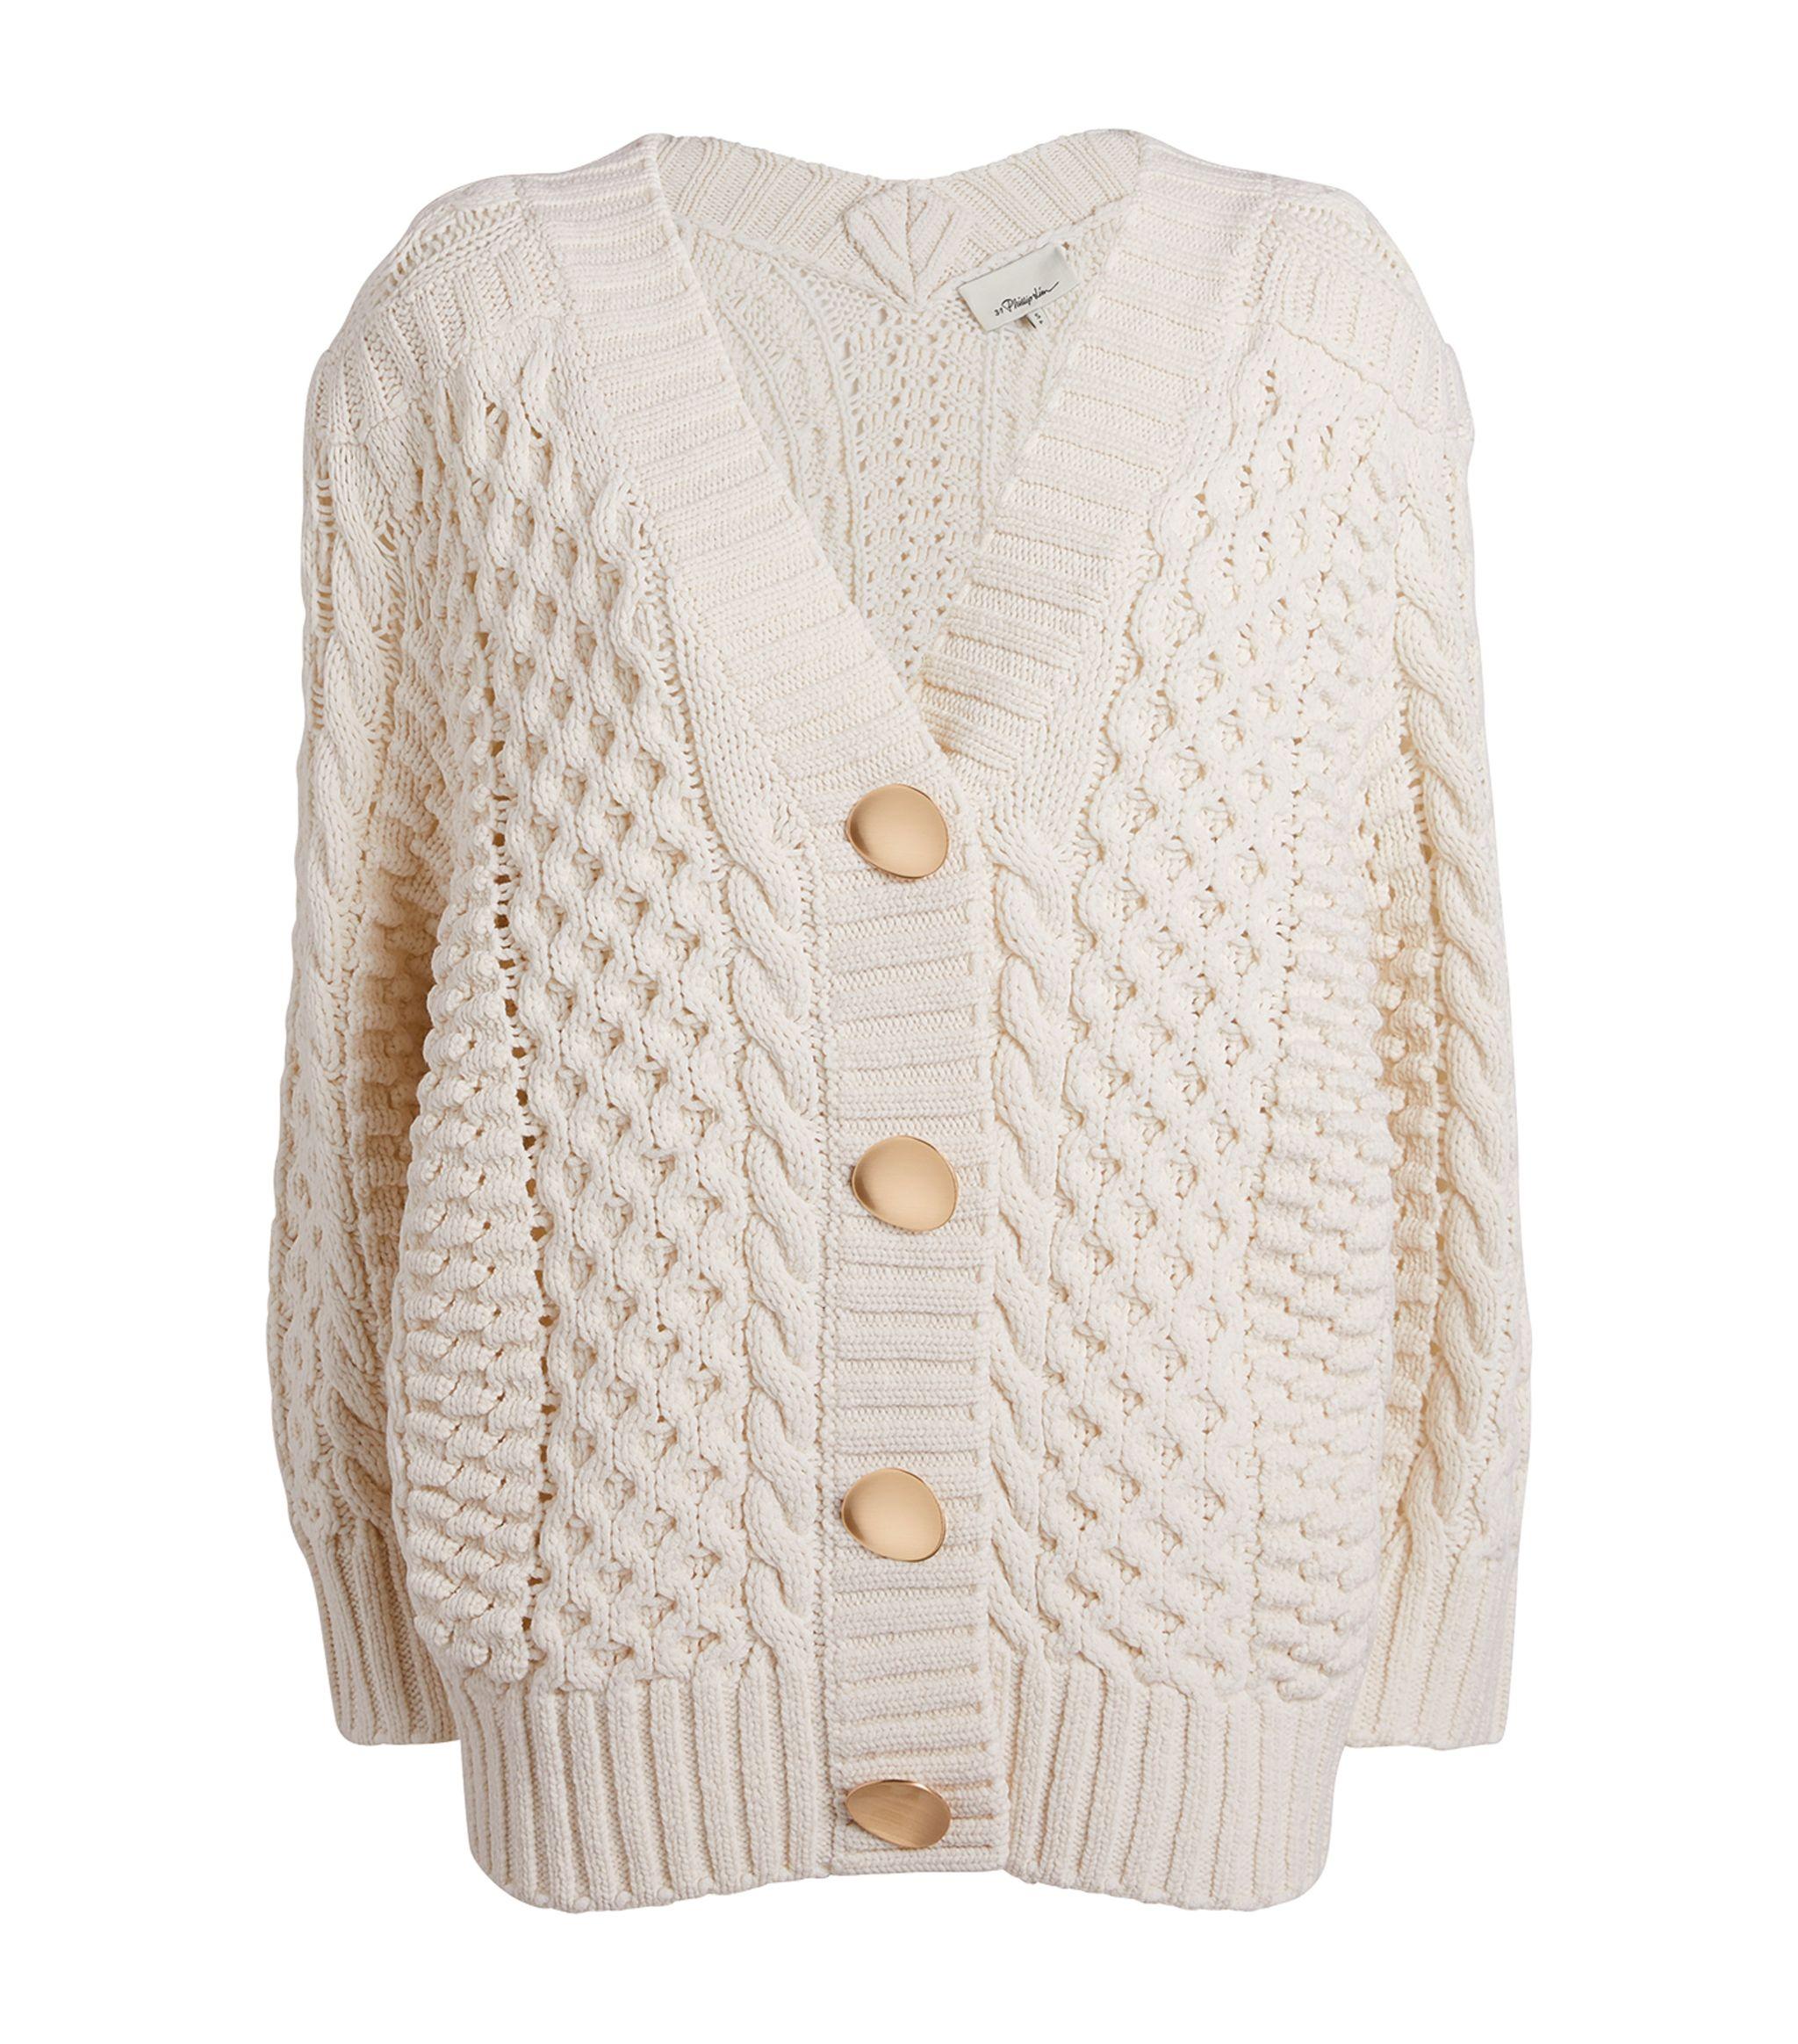 3.1 Phillip Lim Wool Cable-knit Cardigan in White - Lyst